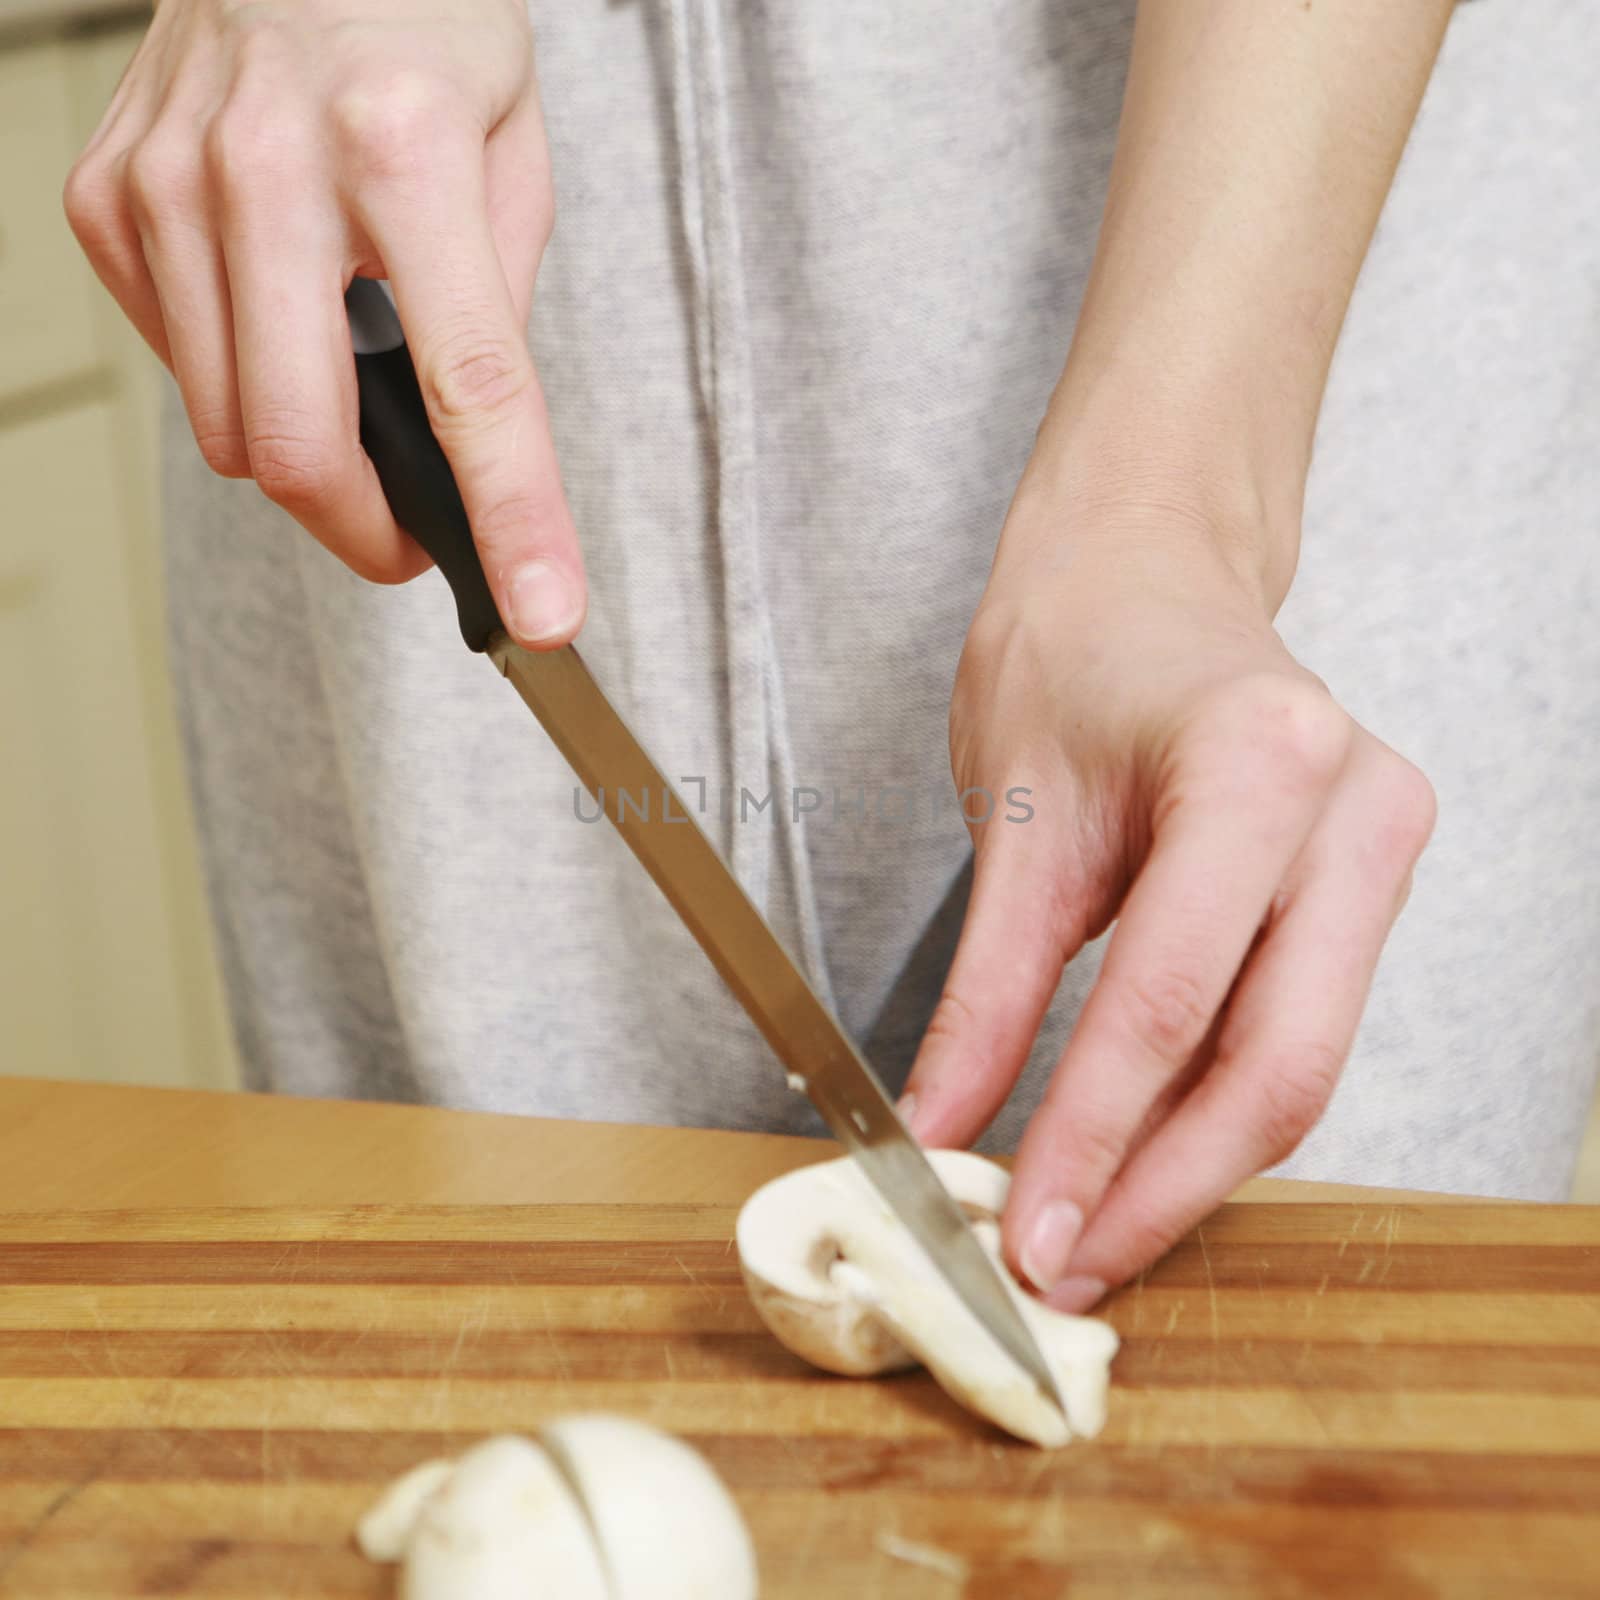 An image of hands cutting white mushrooms